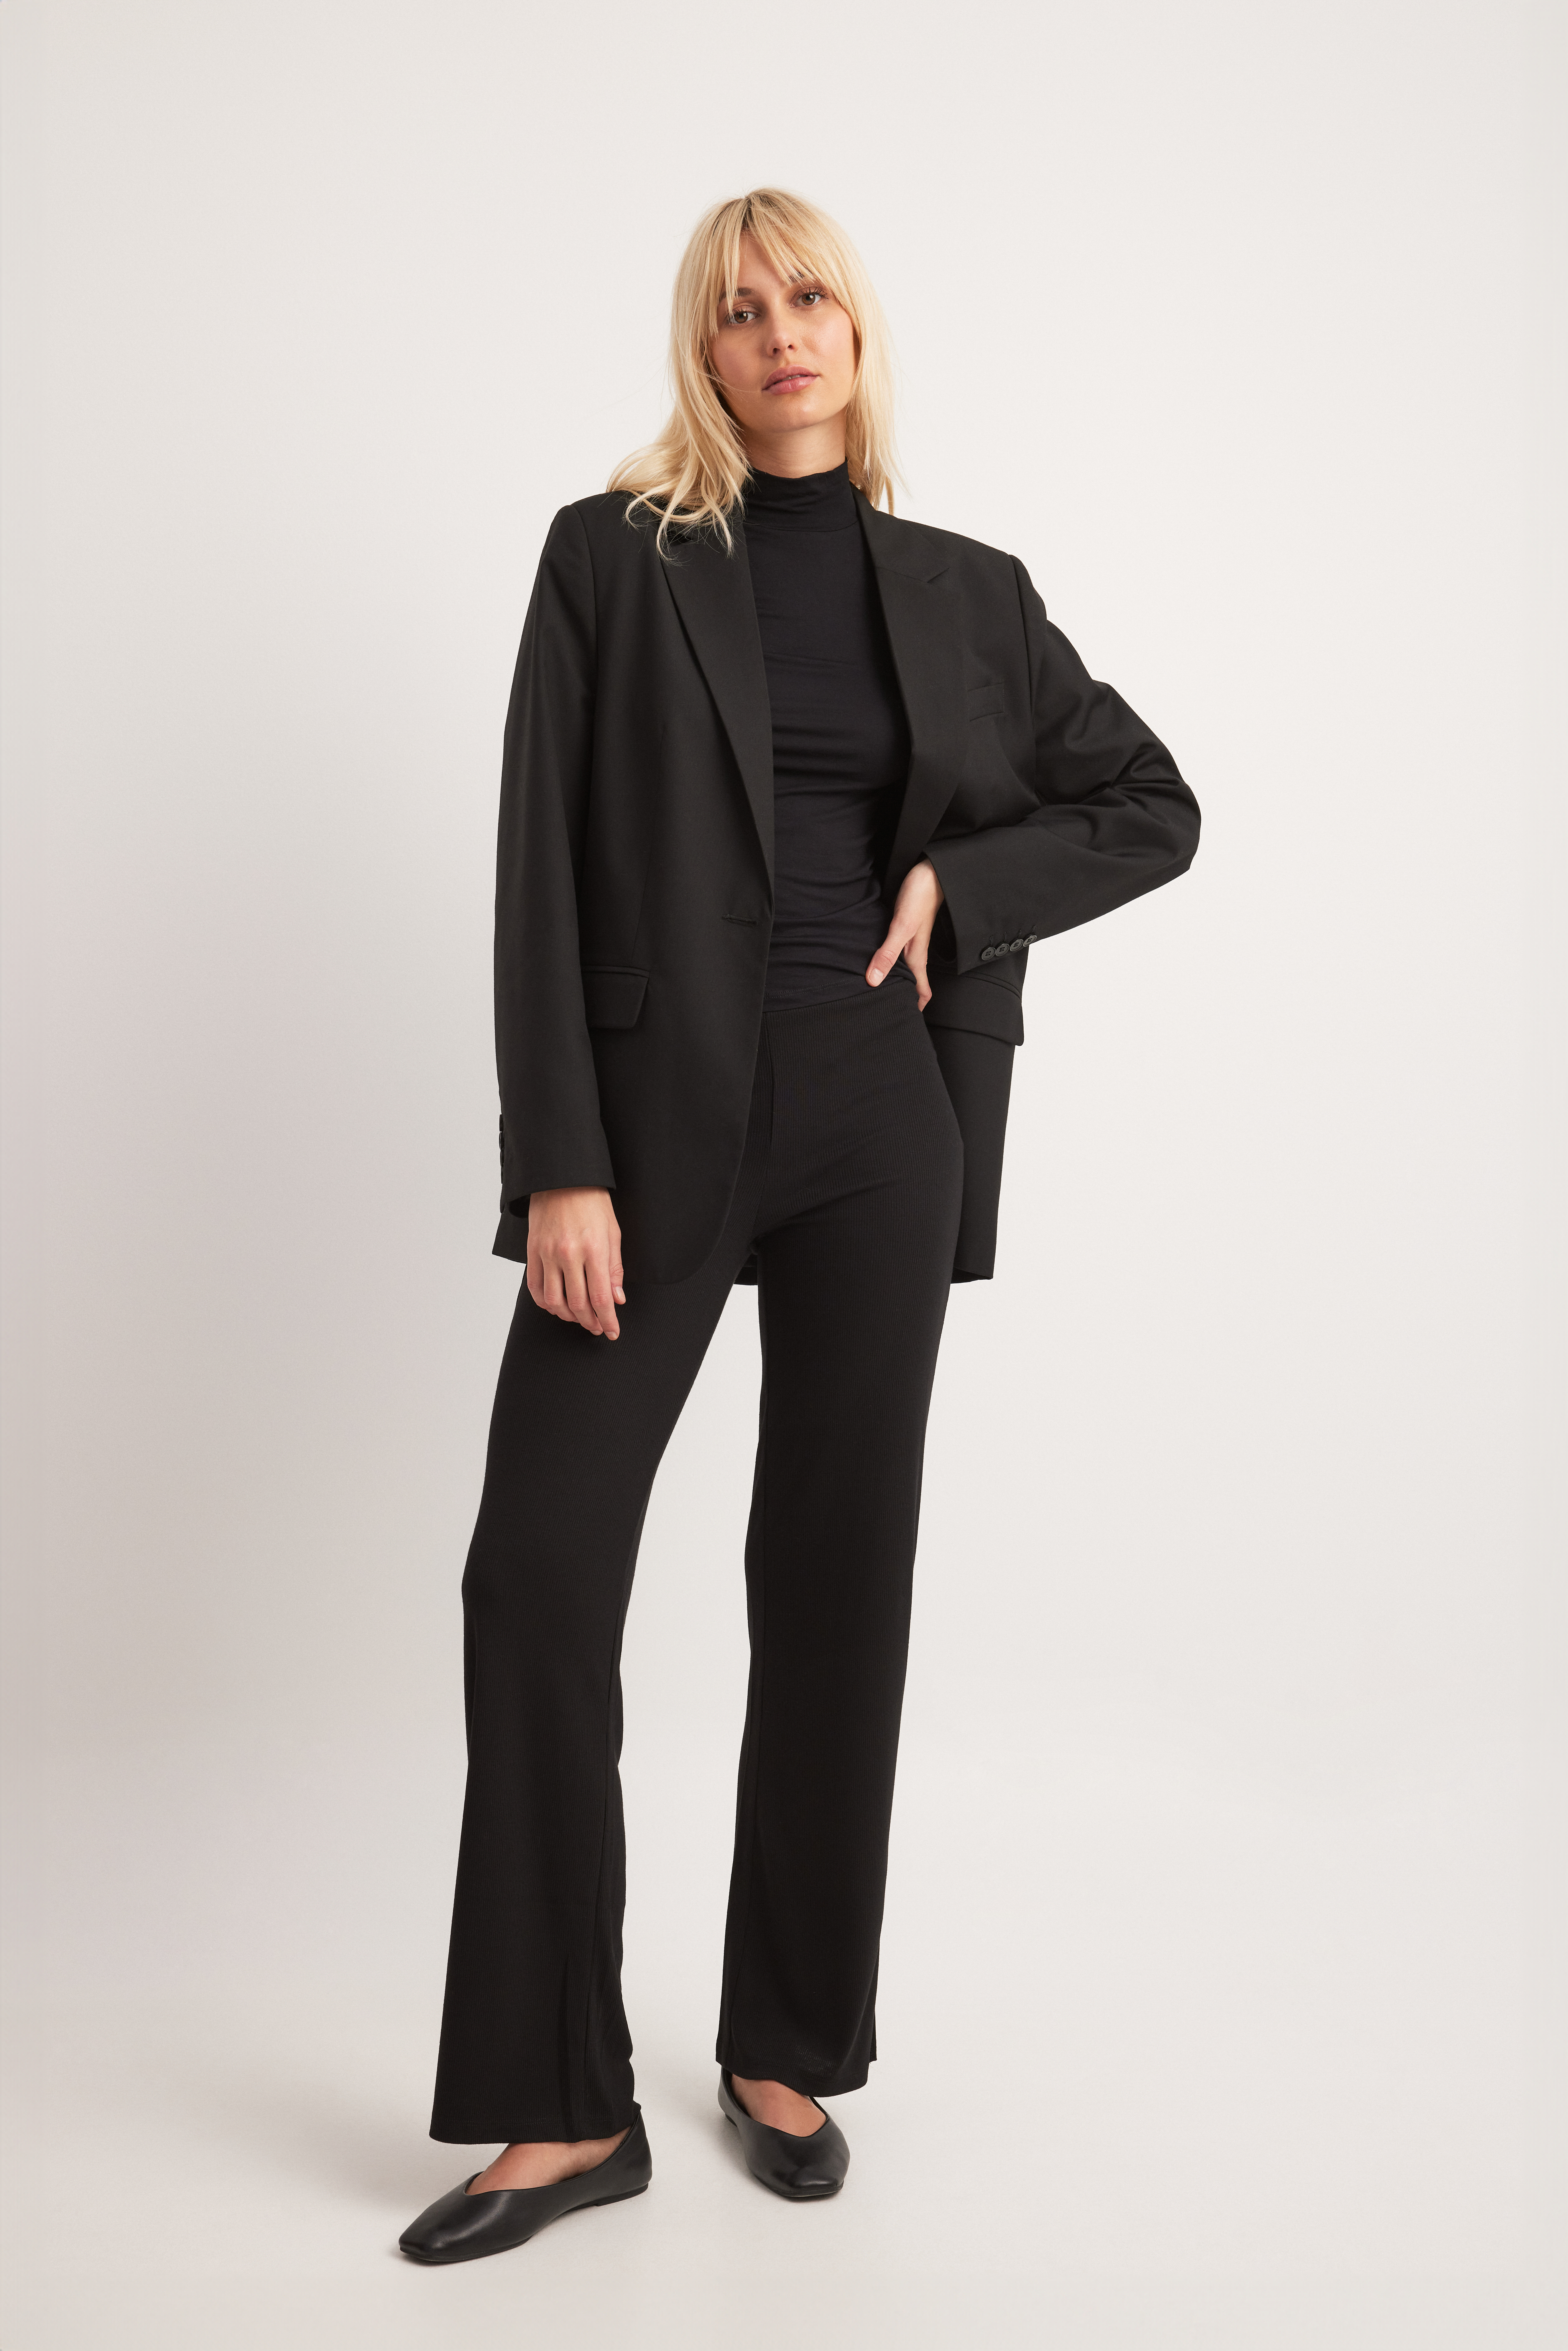 Buy High Waisted Tapered Trousers, Black Dressy Tuxedo Pants for Ladies,  Pants for Women Suit, Elegant Slim Leg Formal Pants, Tailored Pants Online  in India - Etsy